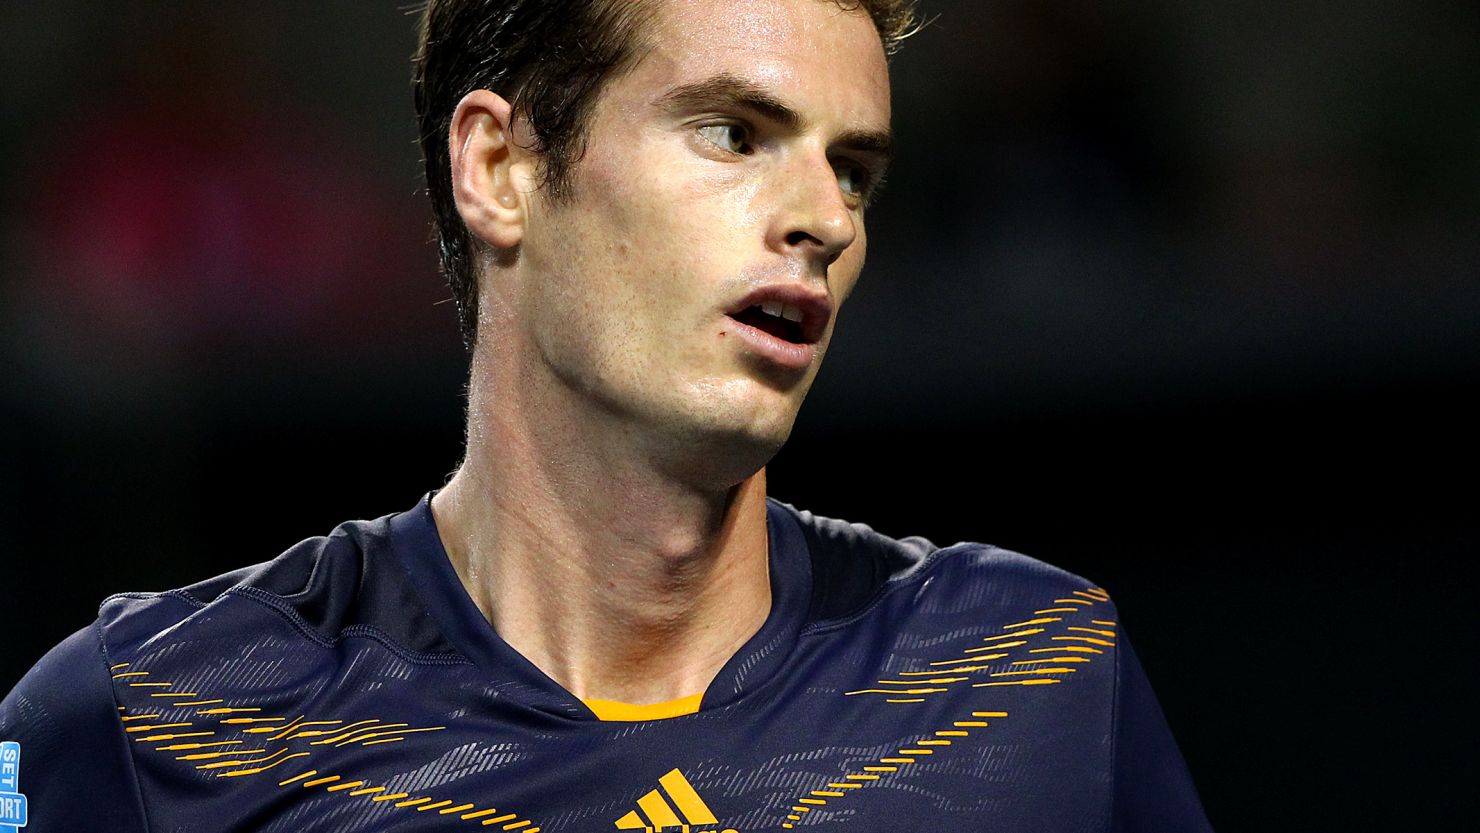 Andy Murray signals victory against Lukas Lacko in their last 16 clash at the Japan Open.